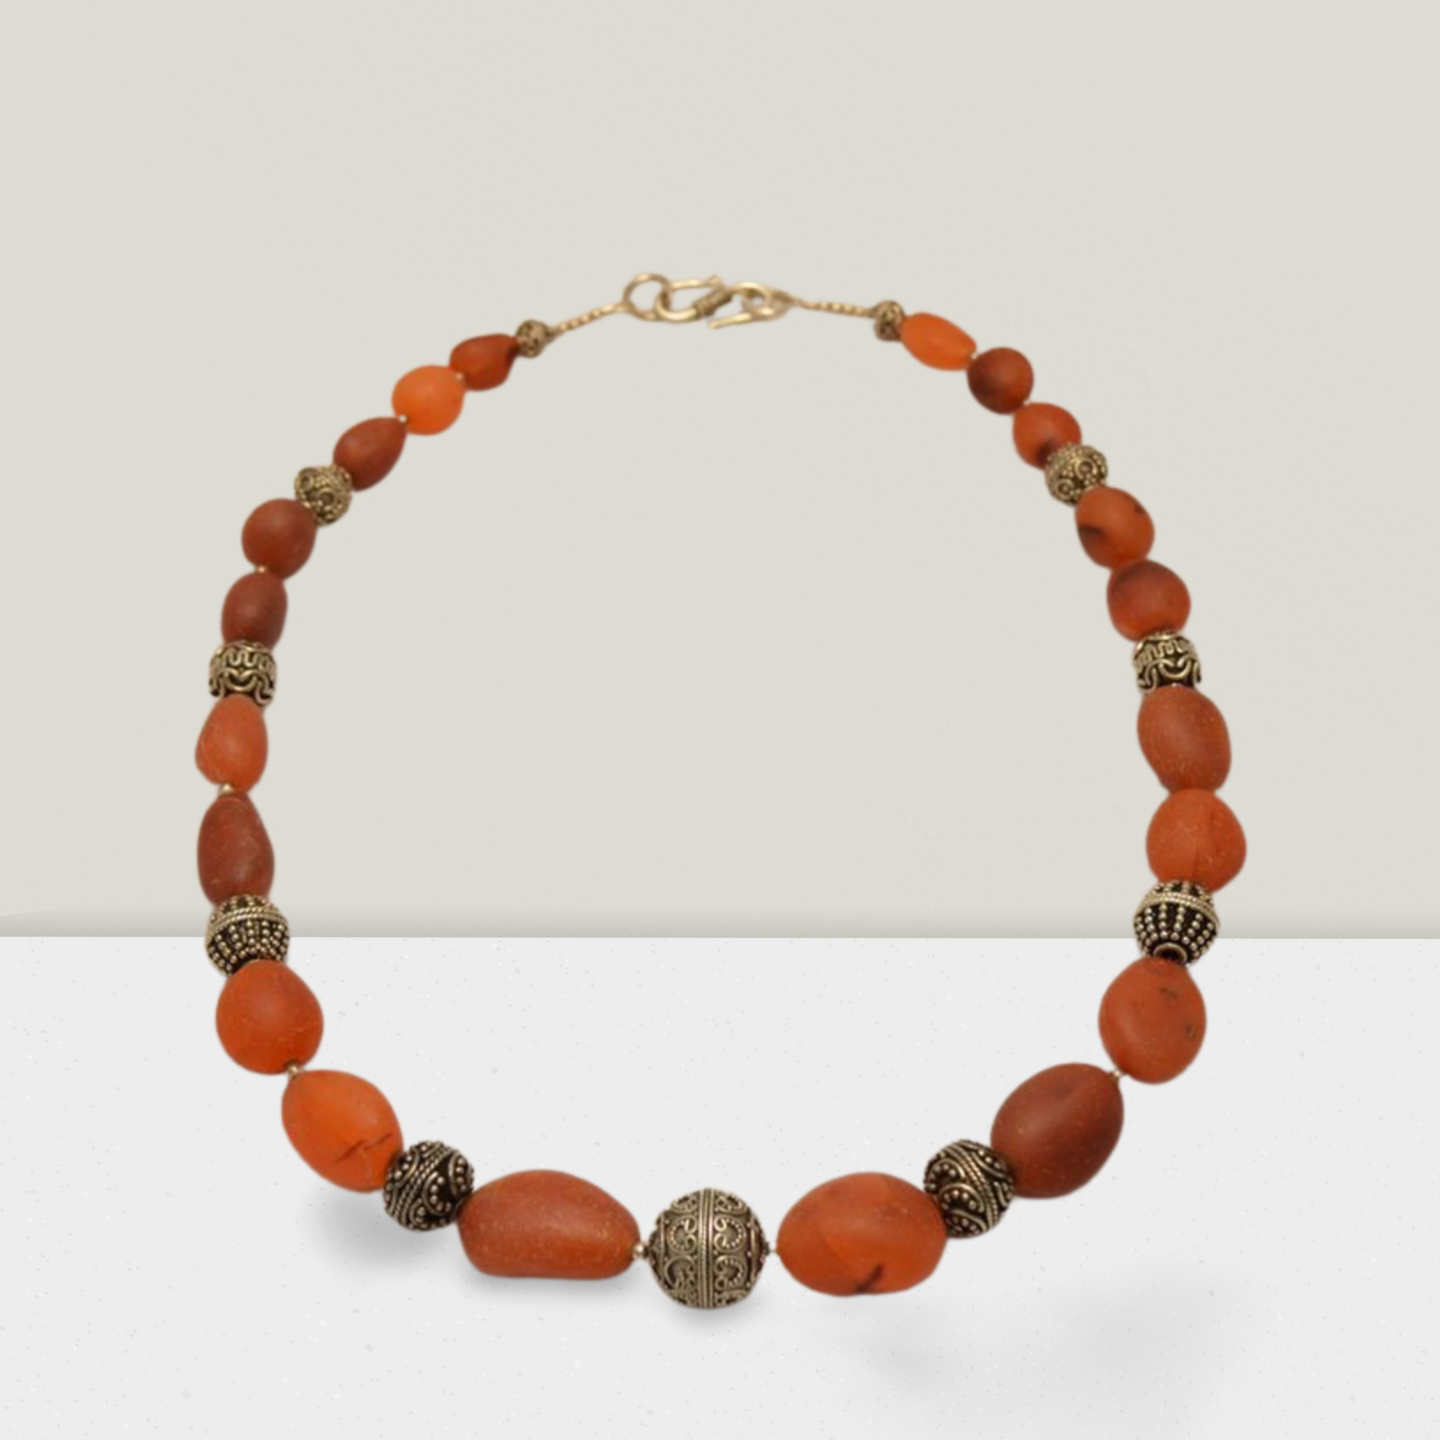 Necklace with old Carnelian stones & sterling silver elements